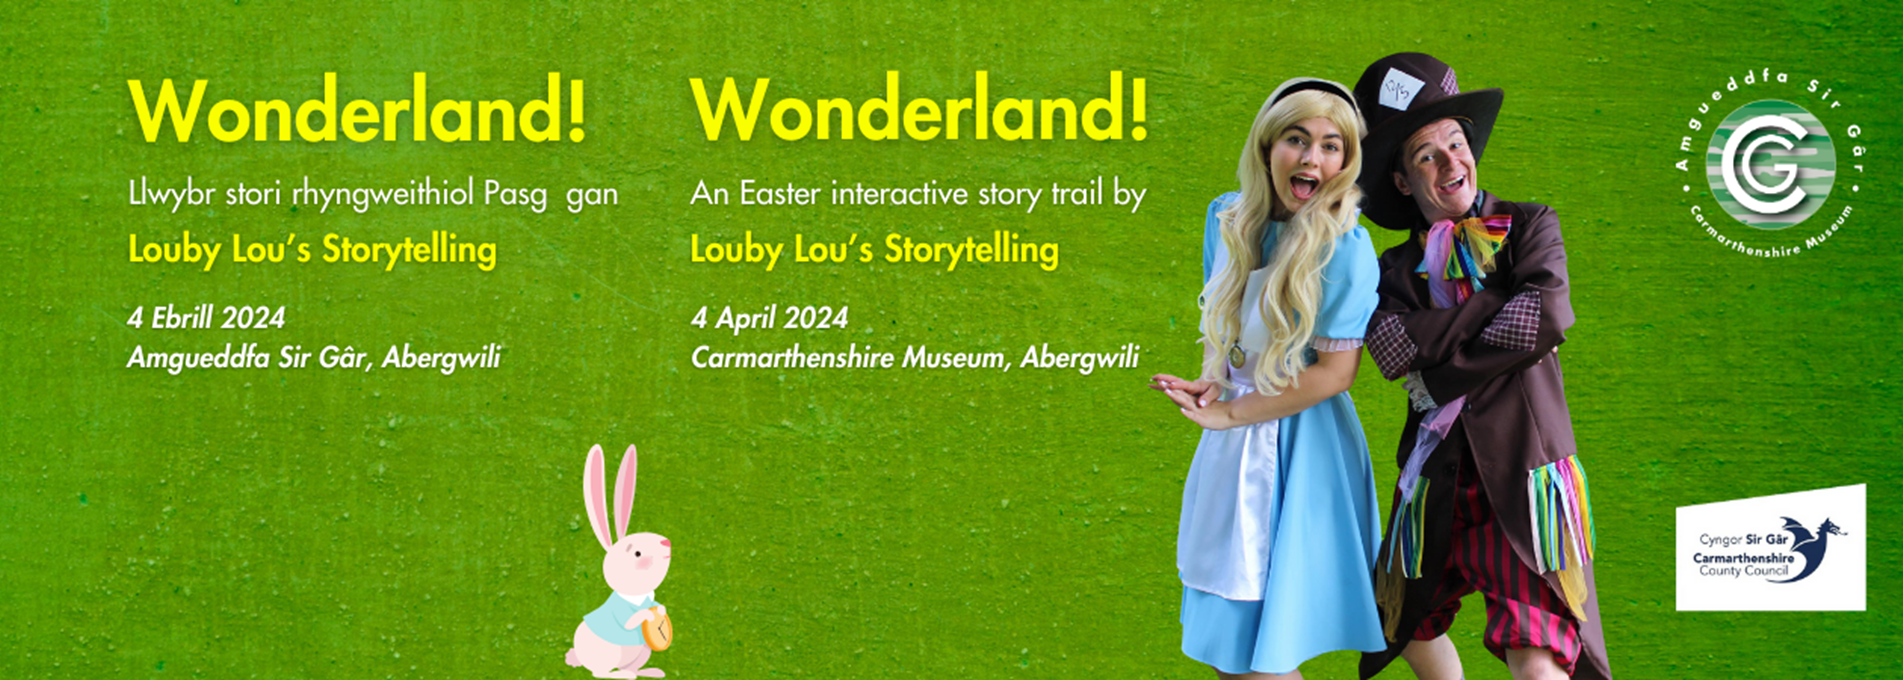 Wonderland! An Easter Interactive Trail by Louby Lou's Storytelling